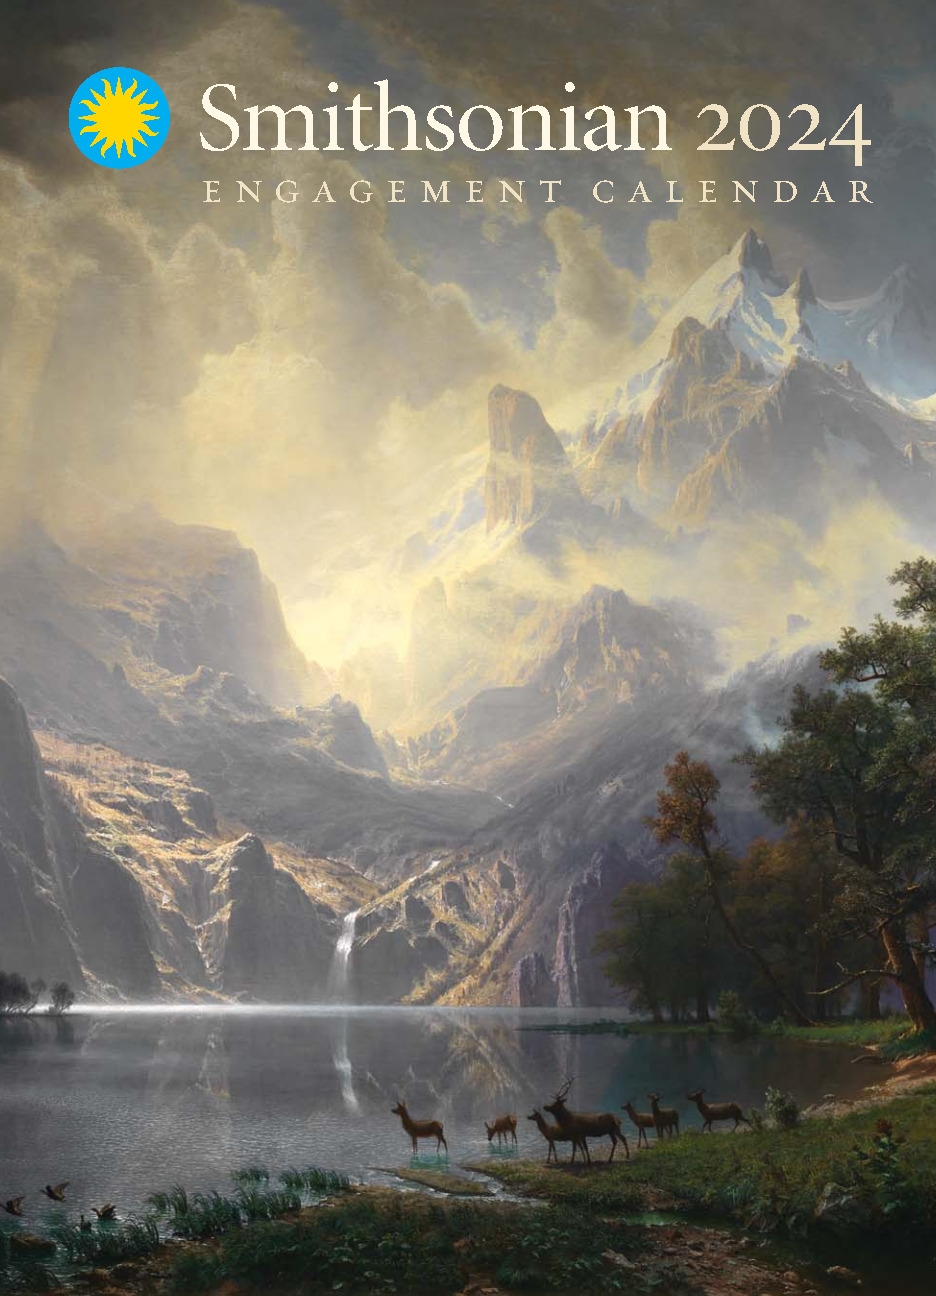 Smithsonian Engagement Calendar 2024 by Smithsonian Institution